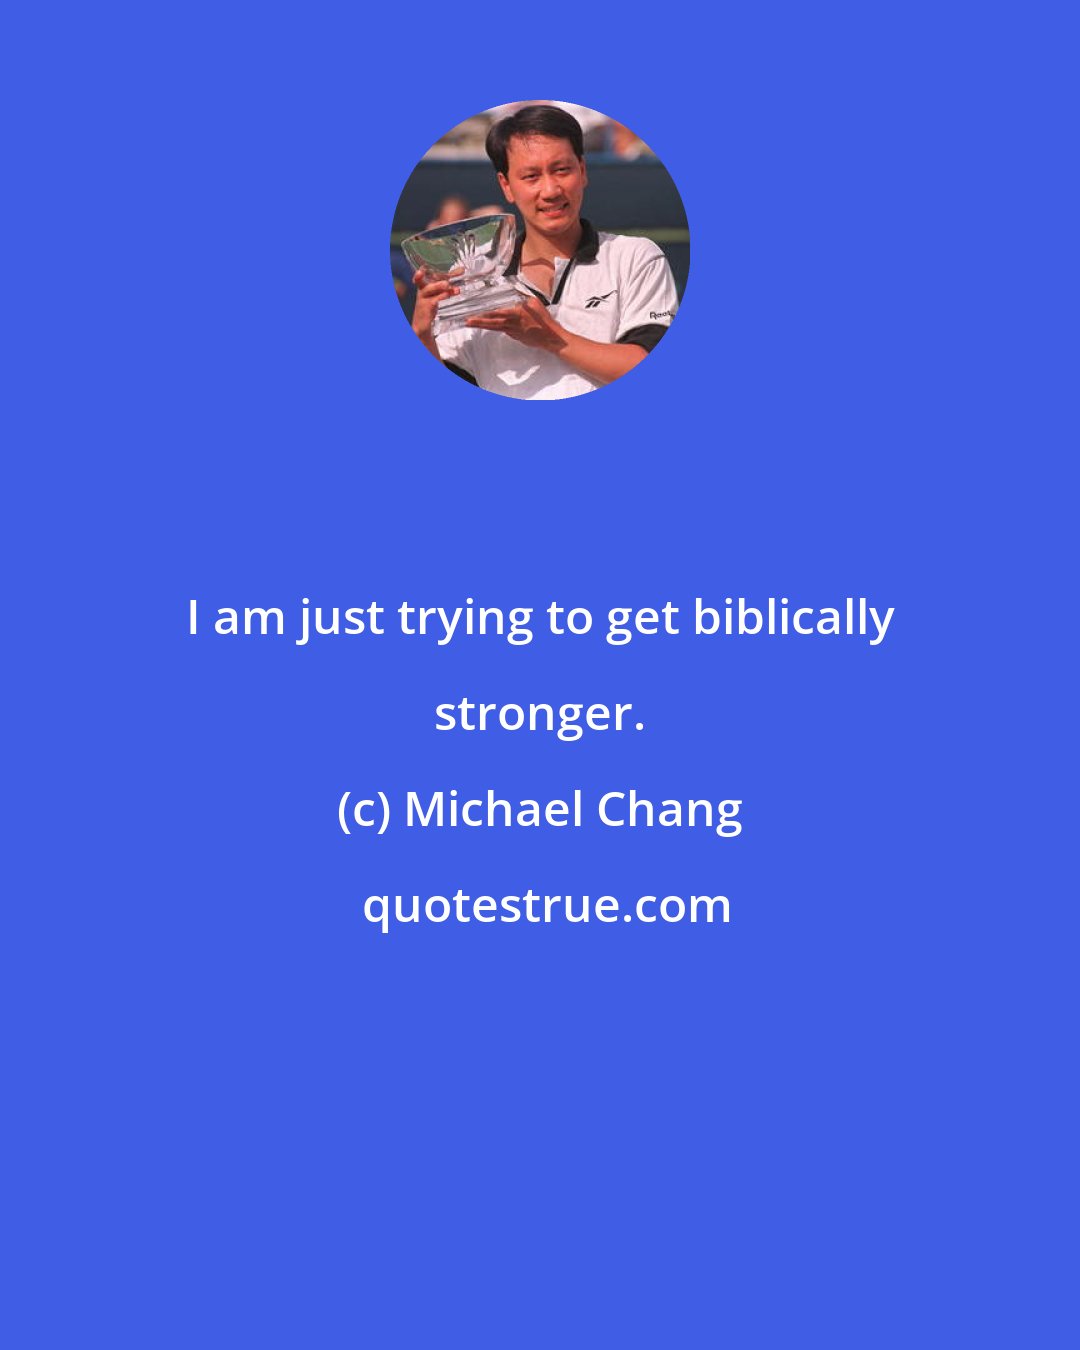 Michael Chang: I am just trying to get biblically stronger.